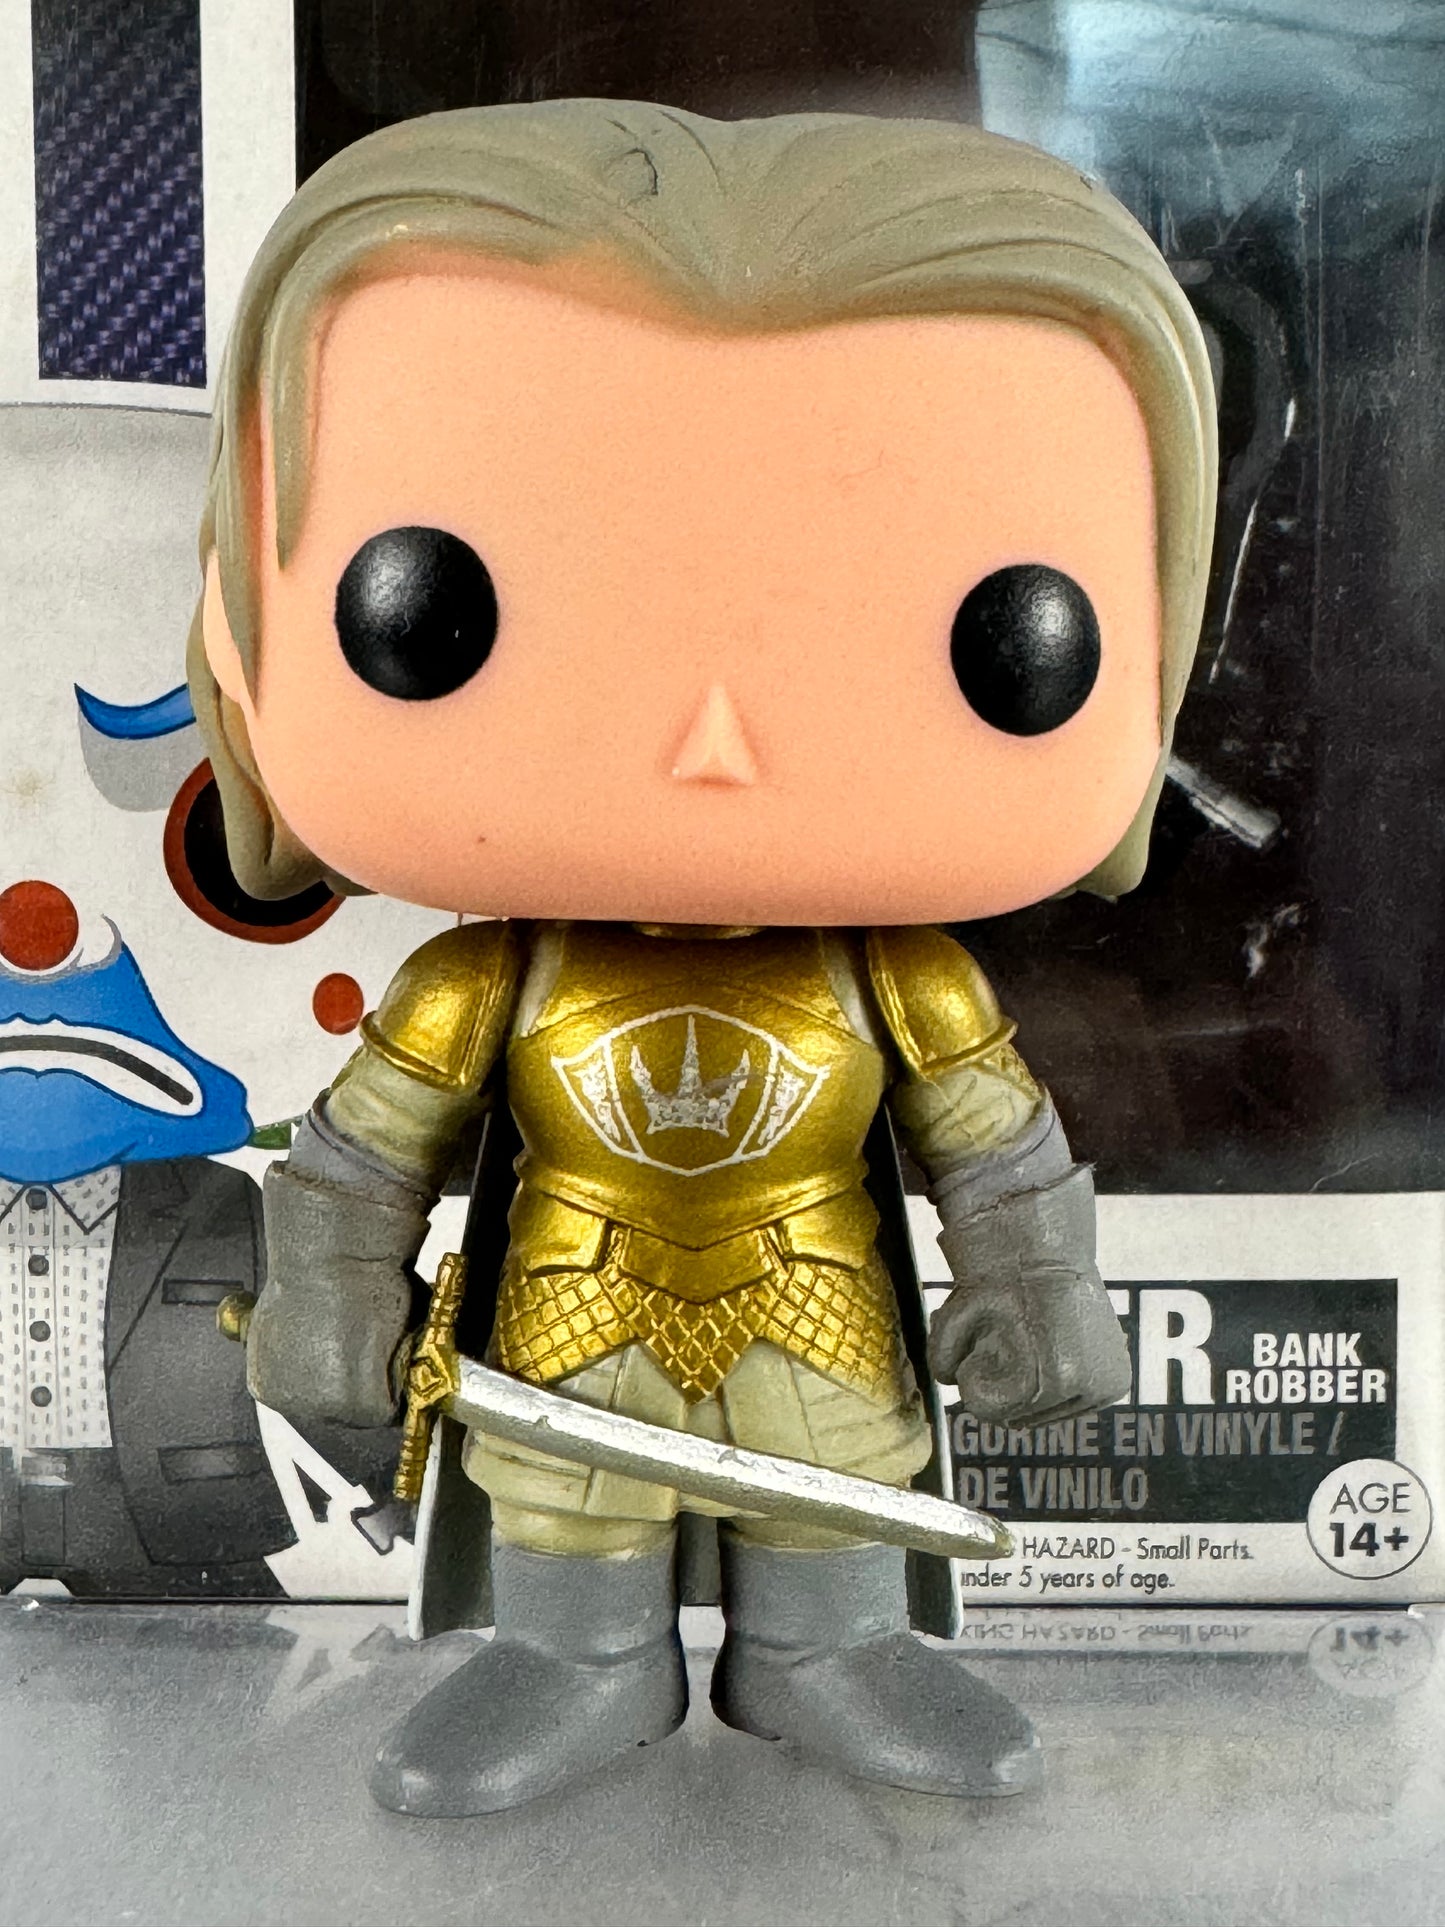 Game of Thrones - Jaime Lannister (10) Vaulted OOB